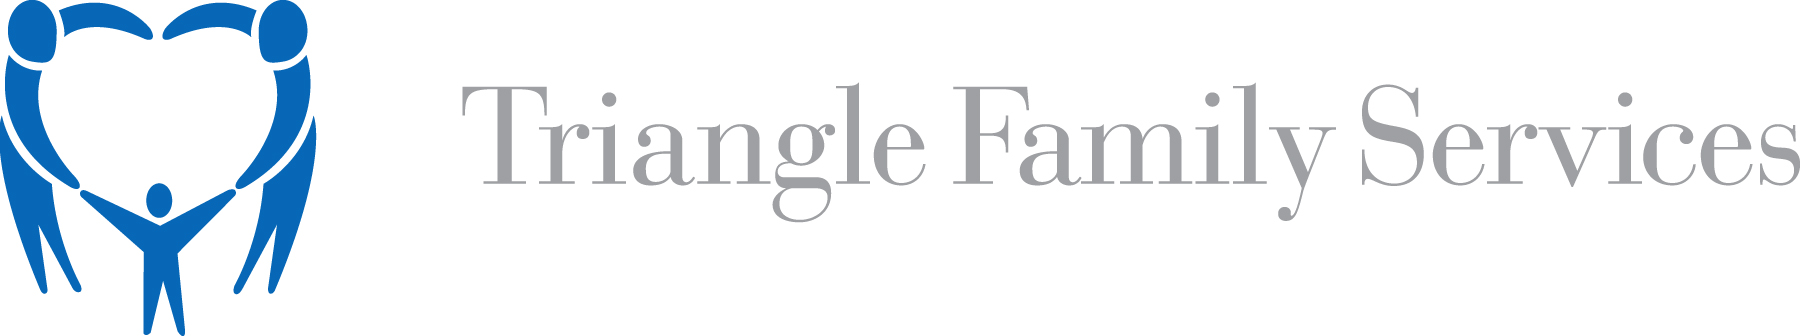 Triangle Family Services, Inc.